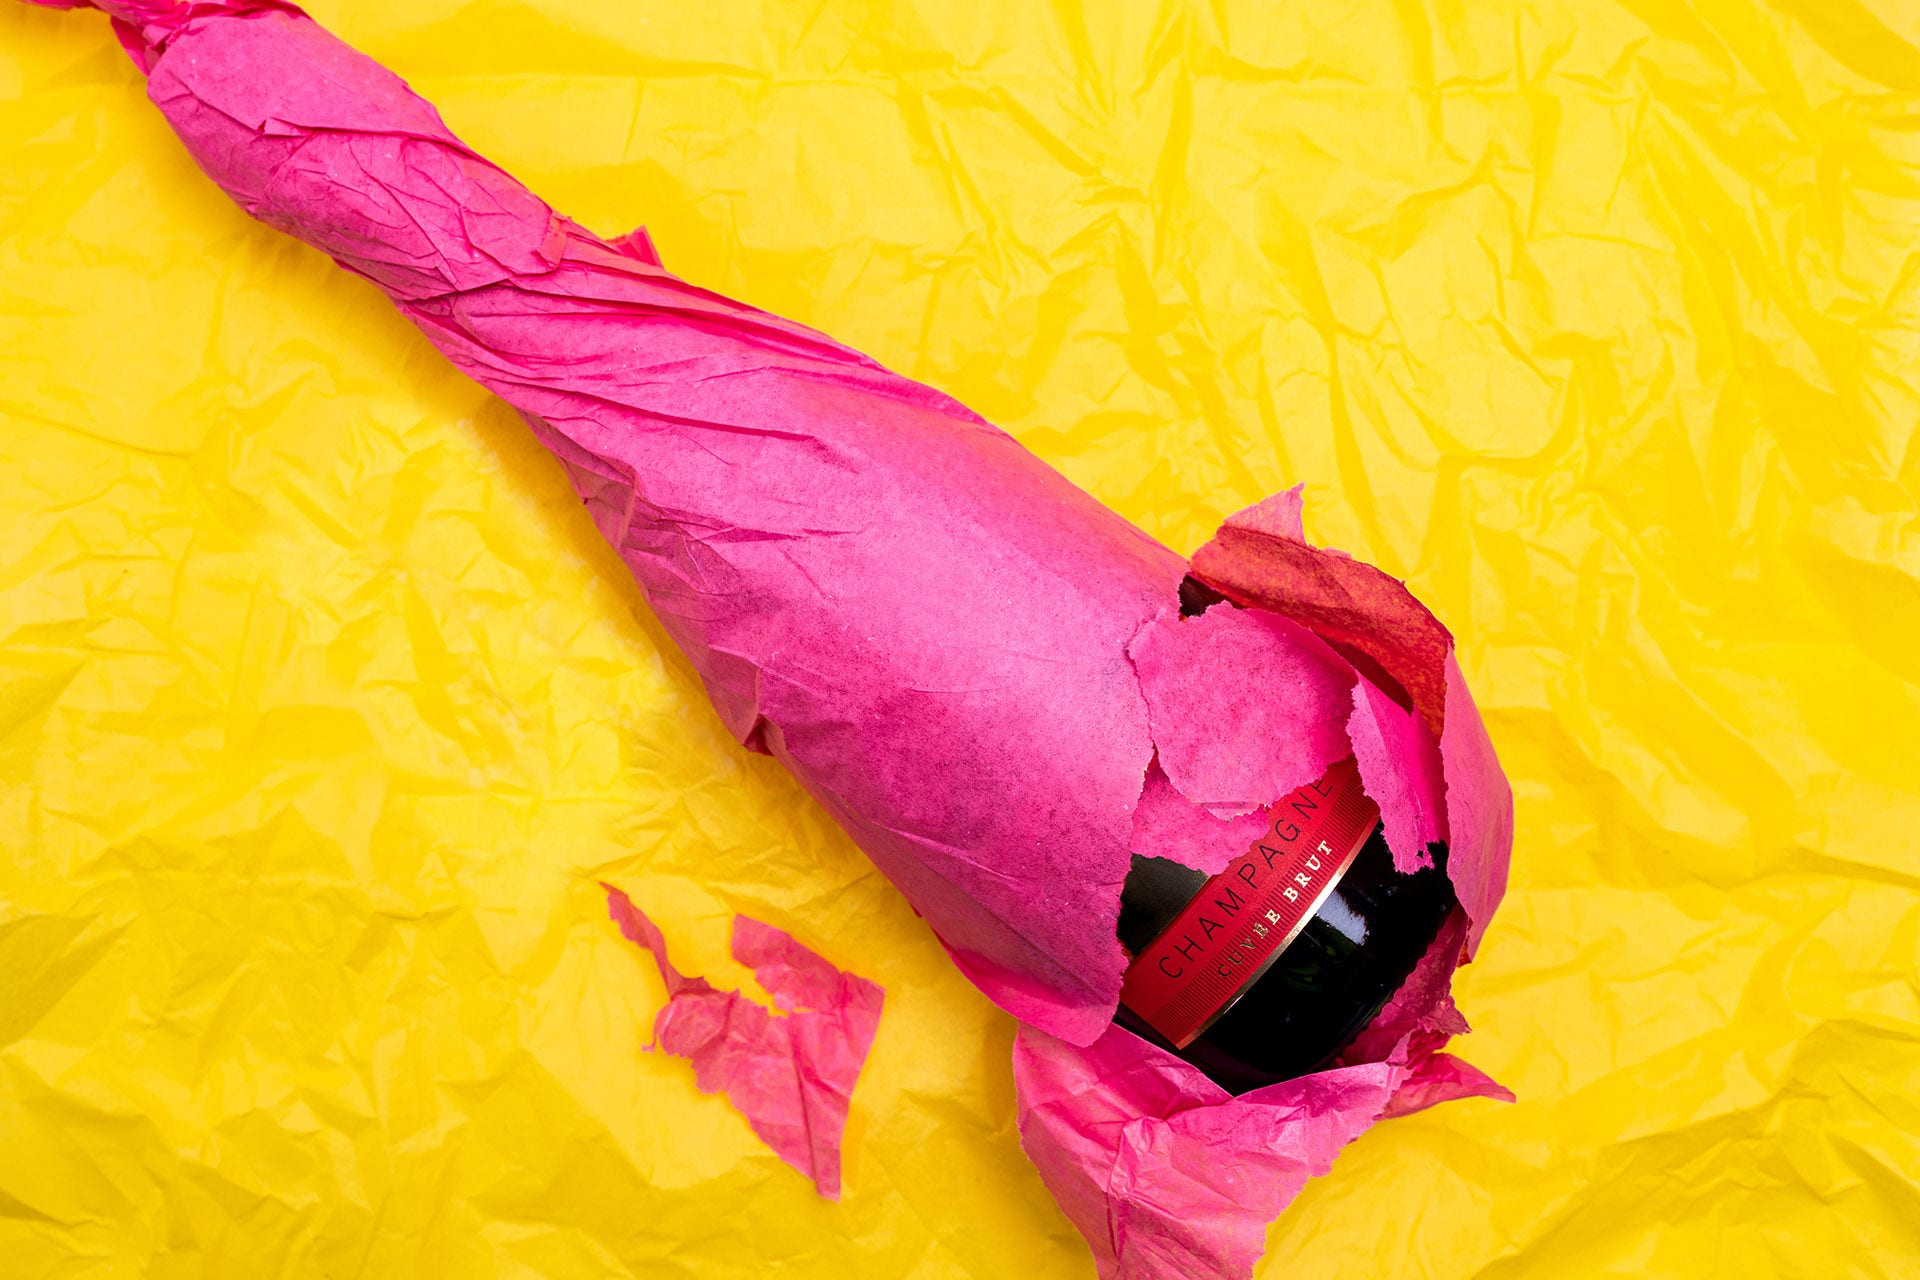 Champagne bottle wrapped in hot pink tissue paper against a bright yellow background